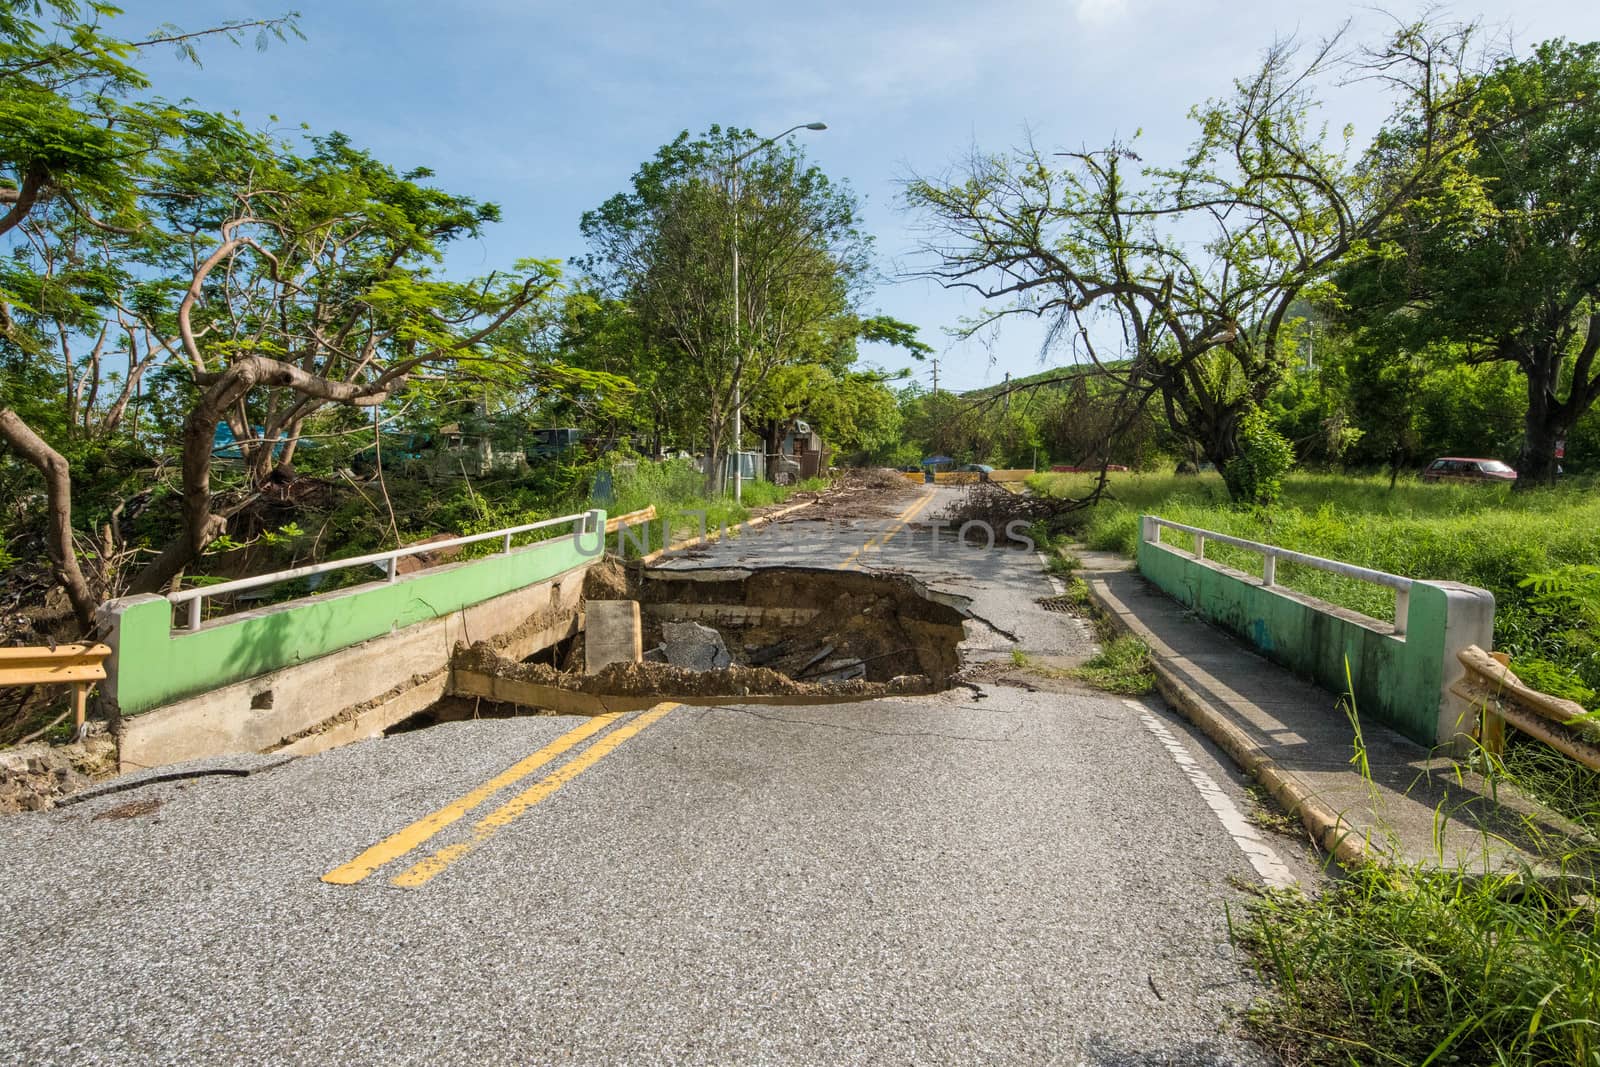 Washout on Puerto Rico road in Caguas, Puerto Rico by cestes001